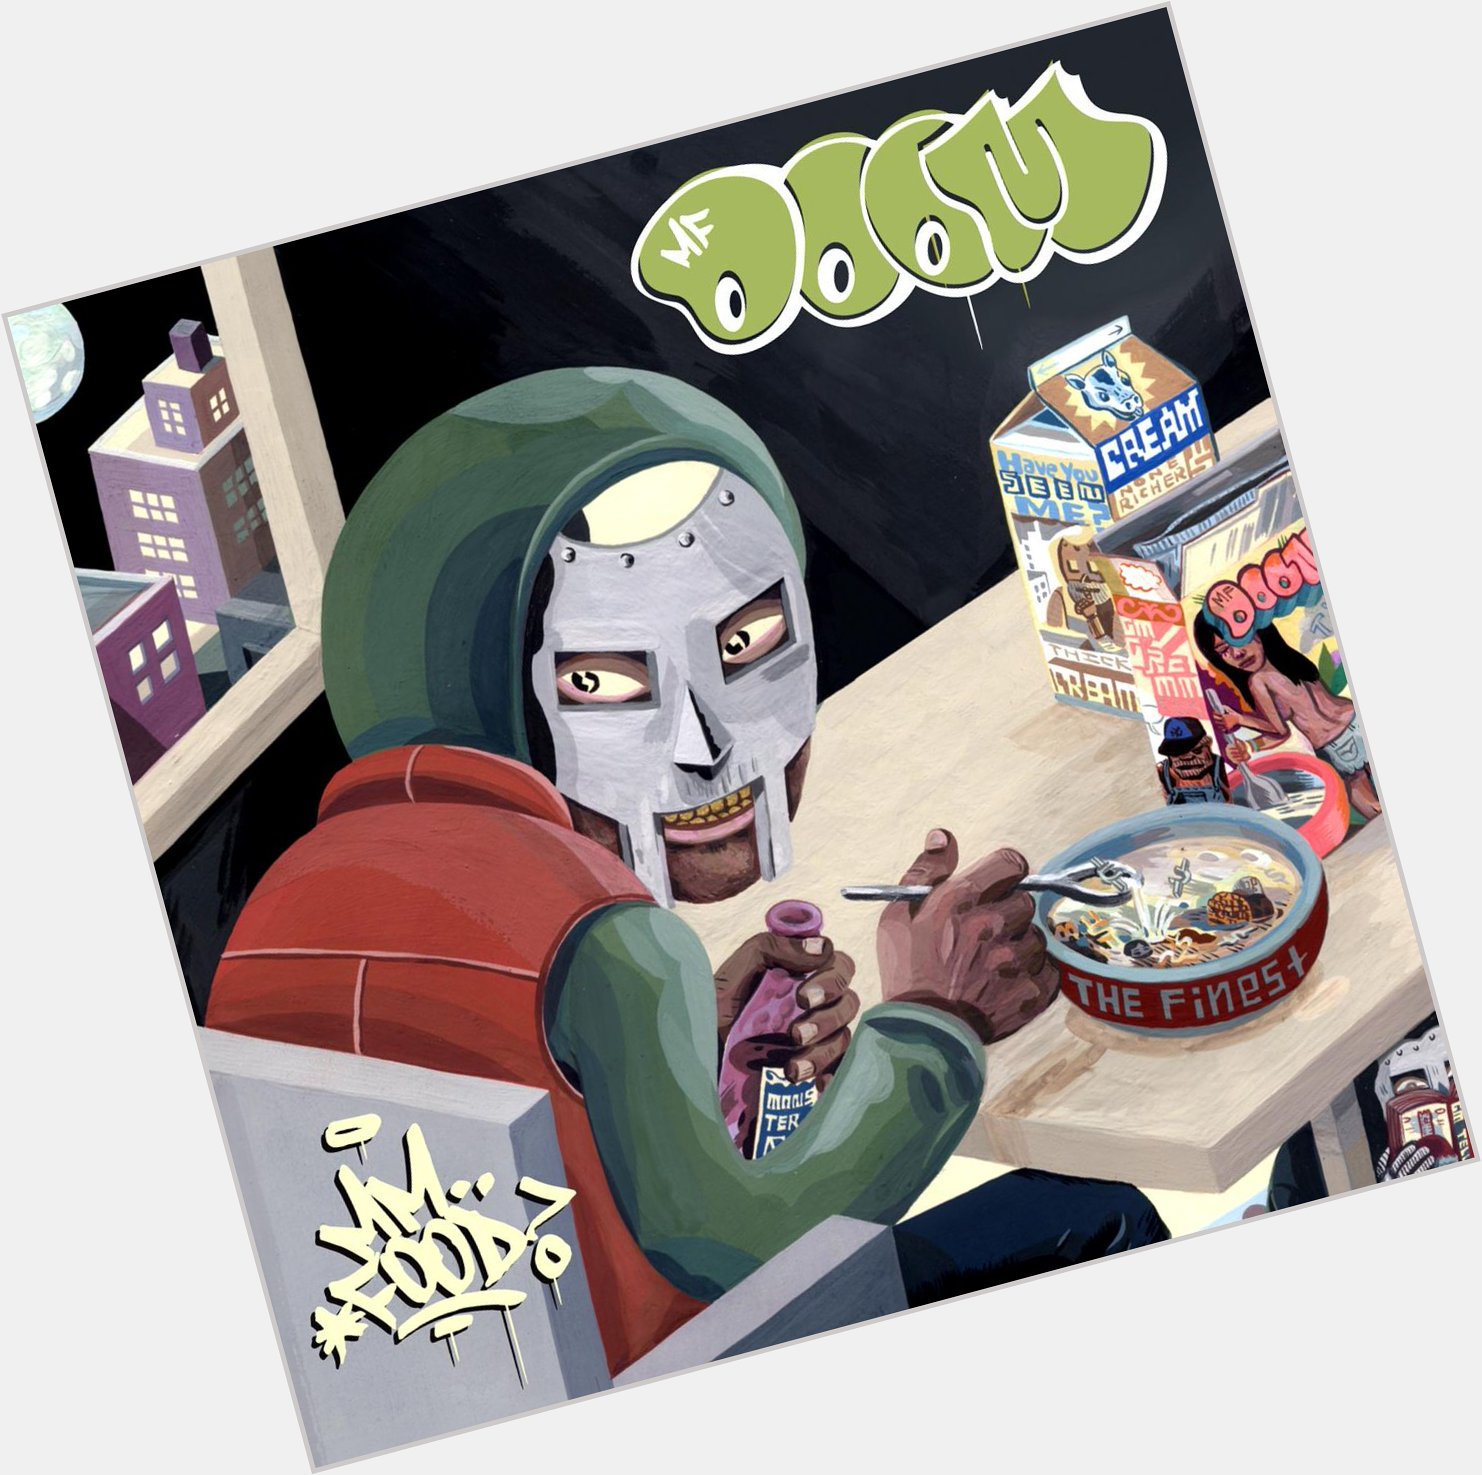 Happy 44th birthday to the Villain Read on \"MM...Food\" 10th anniversary  